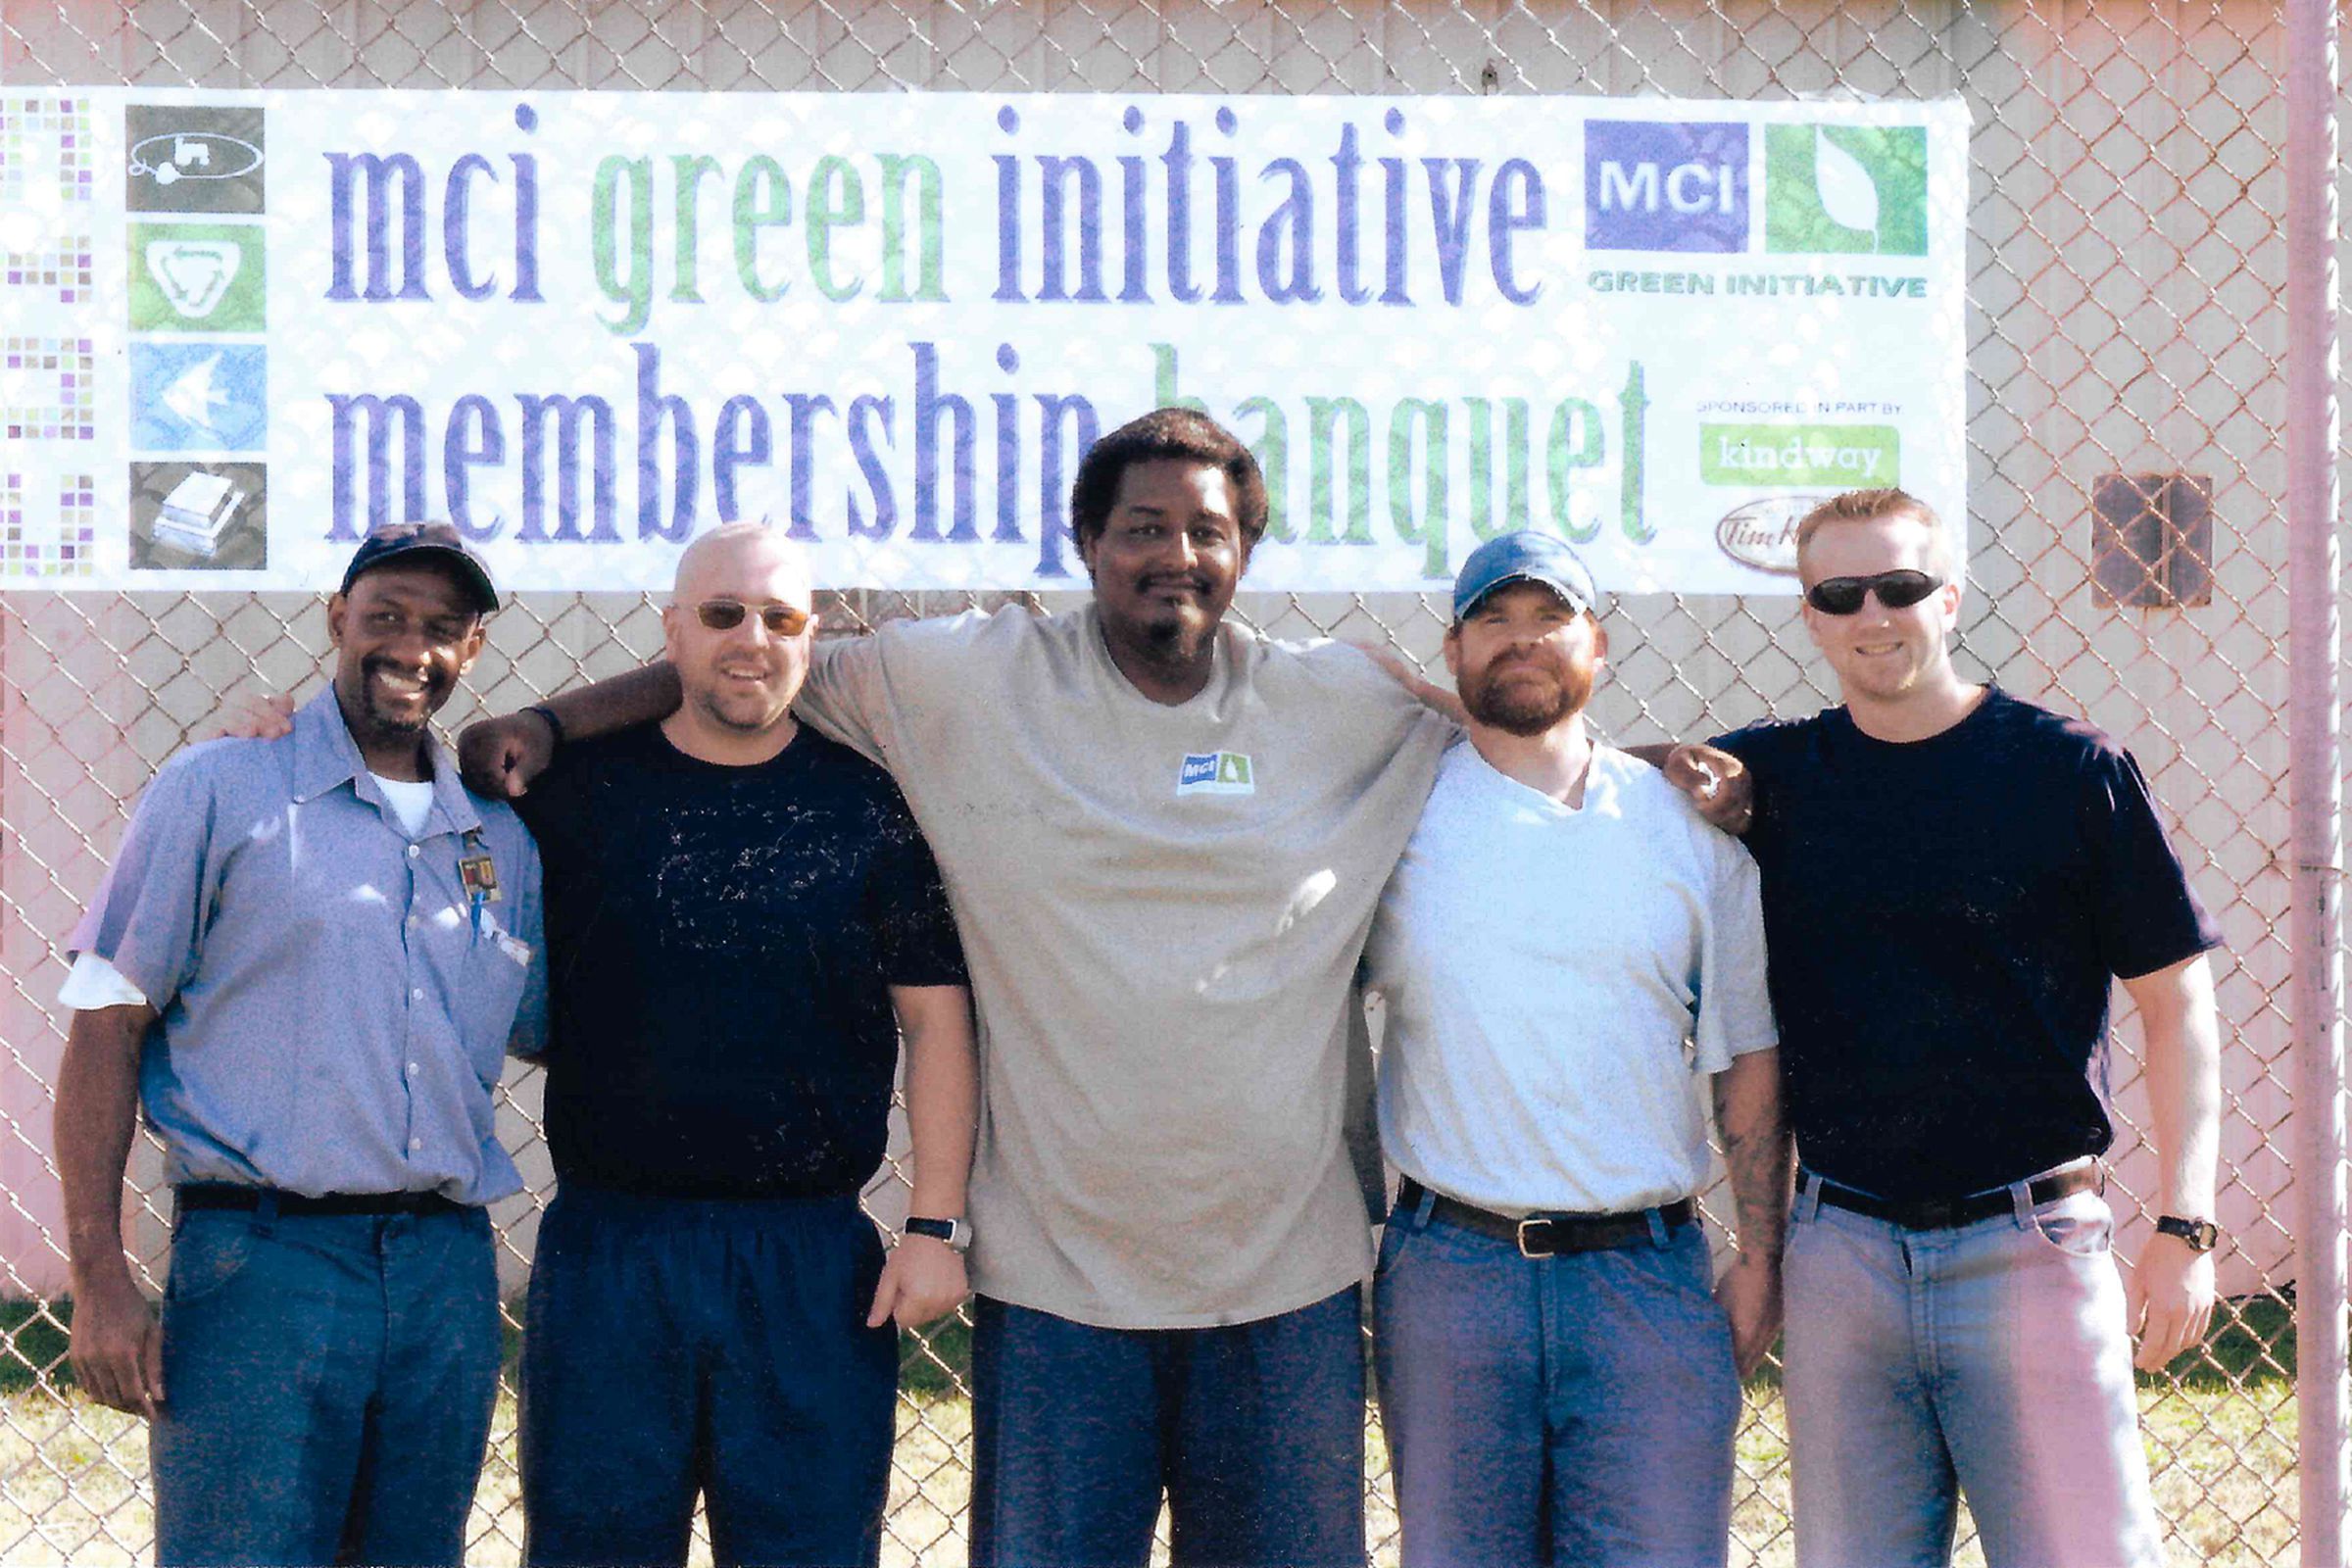 Green Initiative members Stan Transkiy (second from left) and Adam Johnston (far right) with other members.